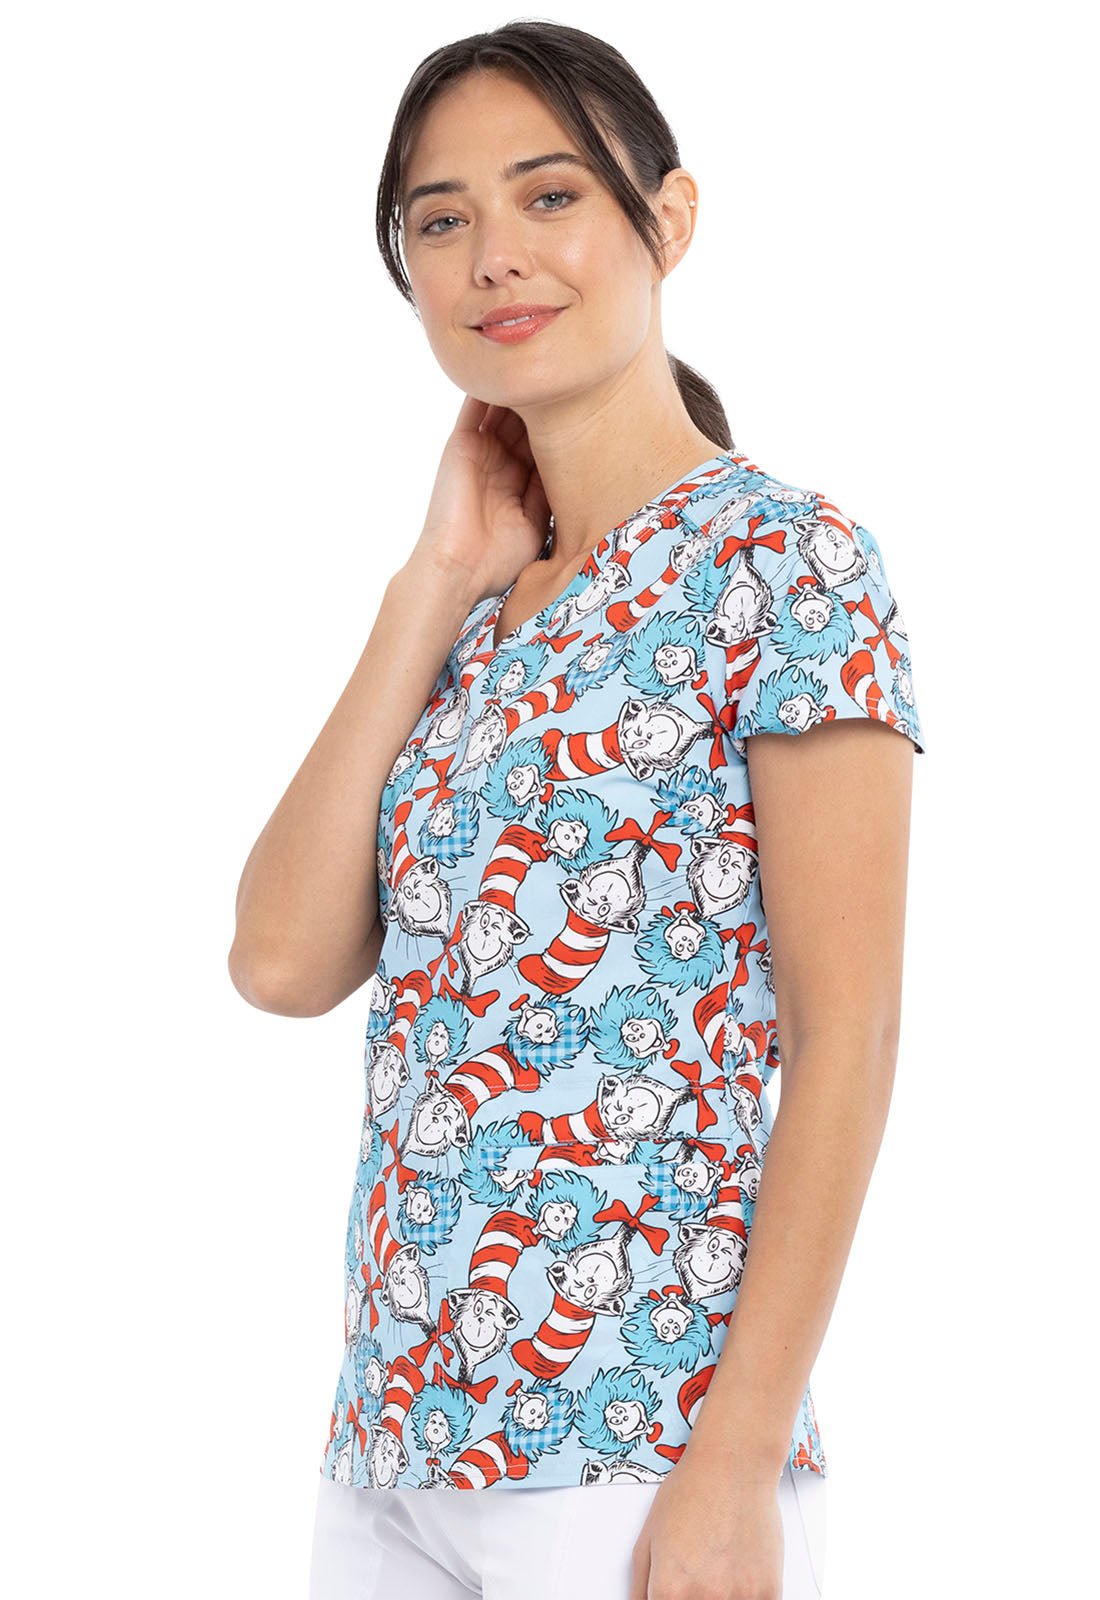 Cat In The Hat Tooniforms Licensed Dr. Seuss V Neck Scrub Top TF666 SEHG - Scrubs Select